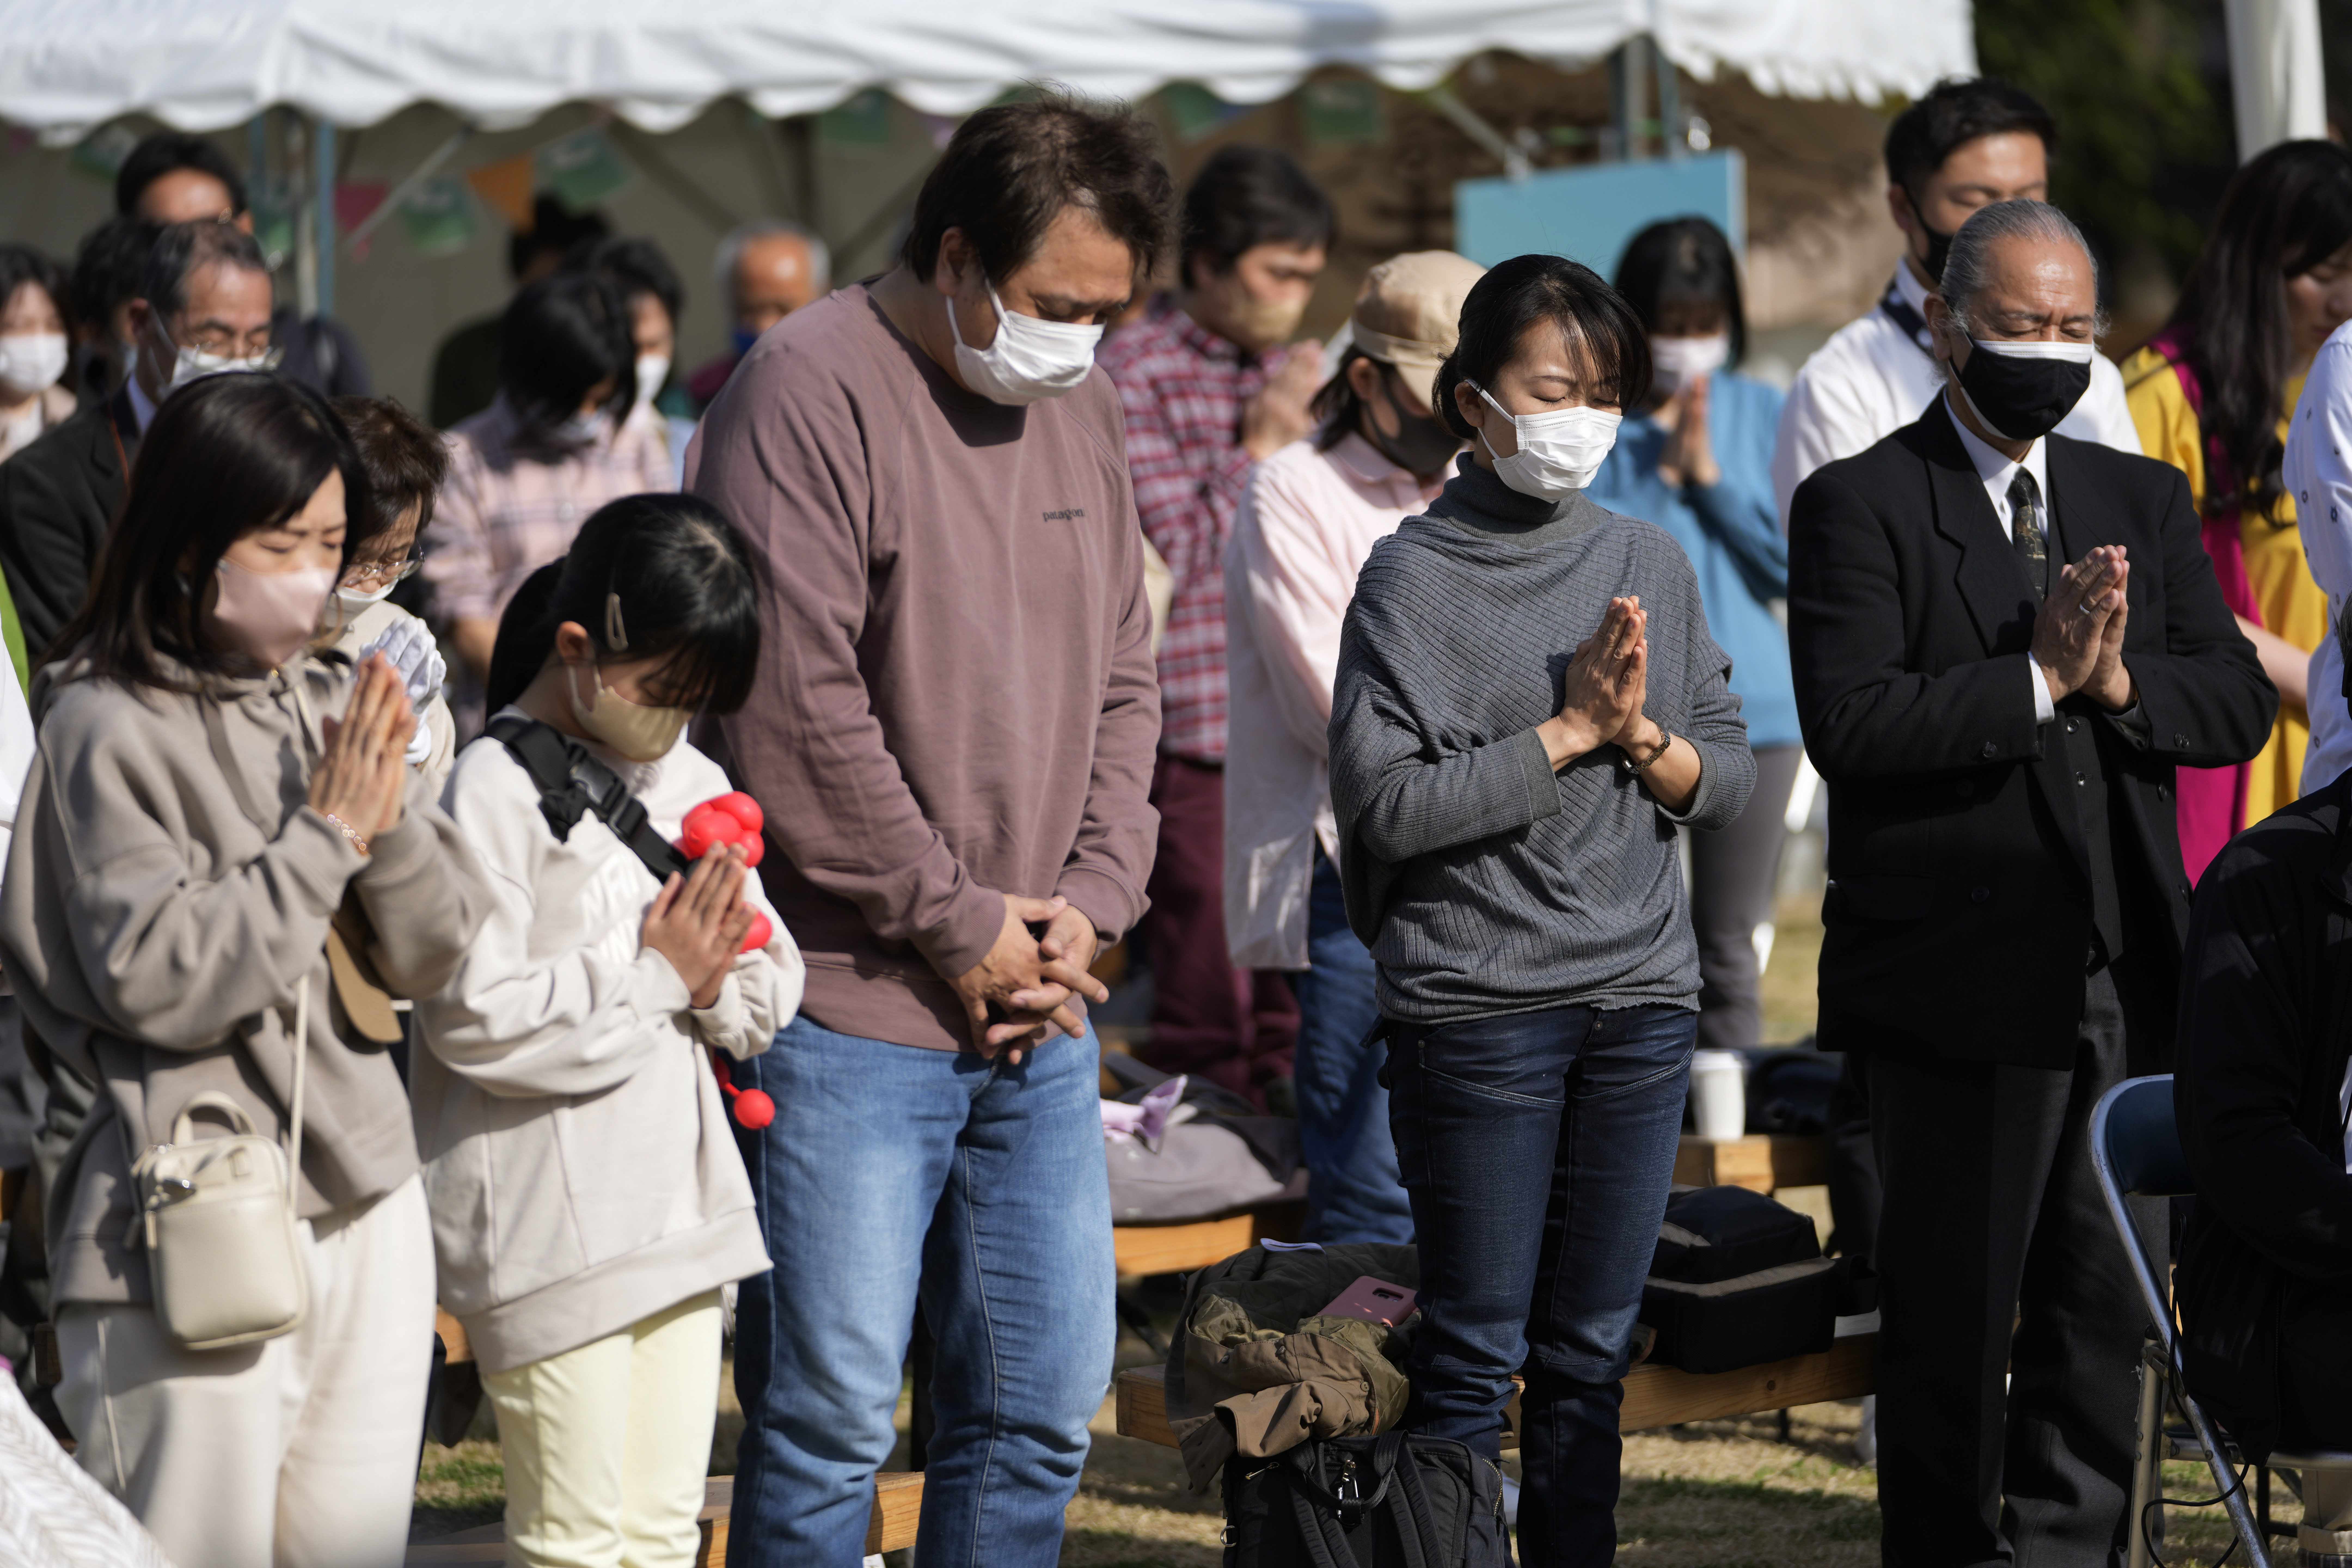 People pause for a minute of silence to commemorate the 311 disaster following an earthquake and tsunami in the Tohoku region 12 year ago, during an anniversary event at Hibiya Park in Tokyo, Saturday, March 11, 2023 